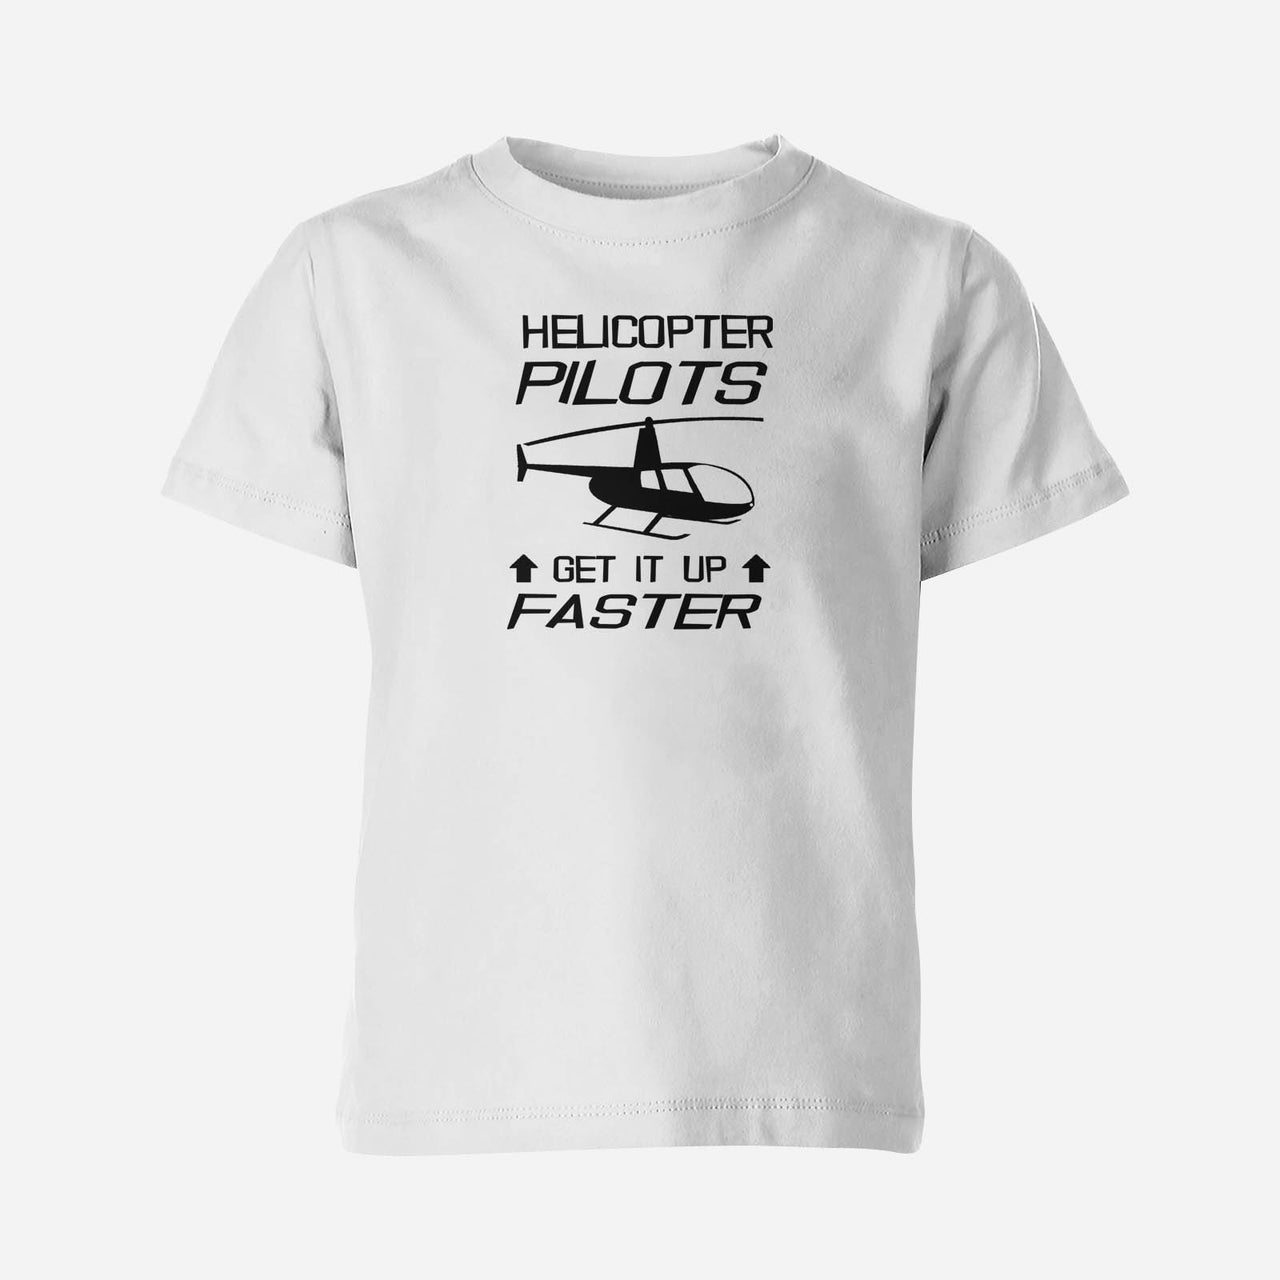 Helicopter Pilots Get It Up Faster Designed Children T-Shirts